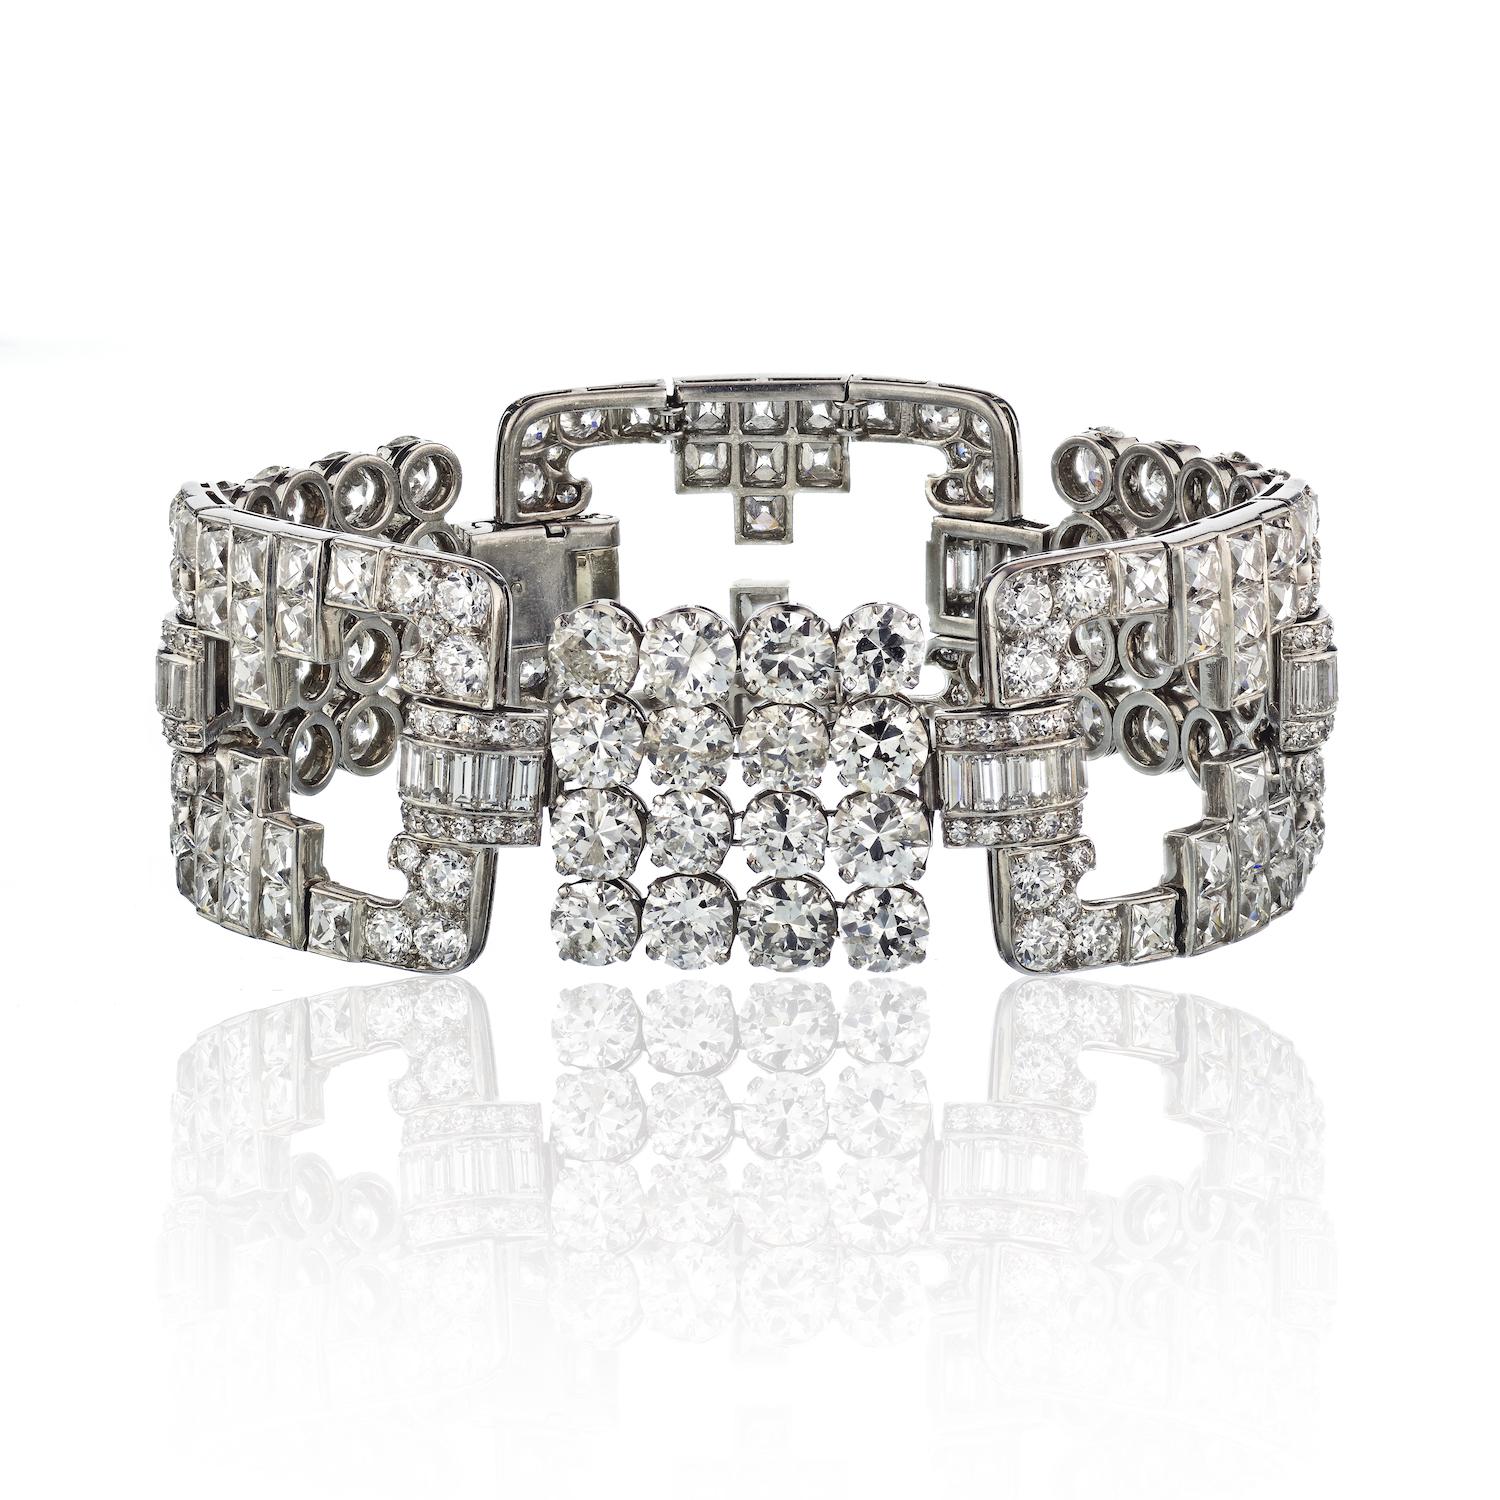 This is an impressive diamond link bracelet mounted with luxurious french cut diamonds, vintage round cut diamonds as well as baguette cuts.
Indulging and scintillating this incredible vintage diamond bracelet features 45 carats of total diamond